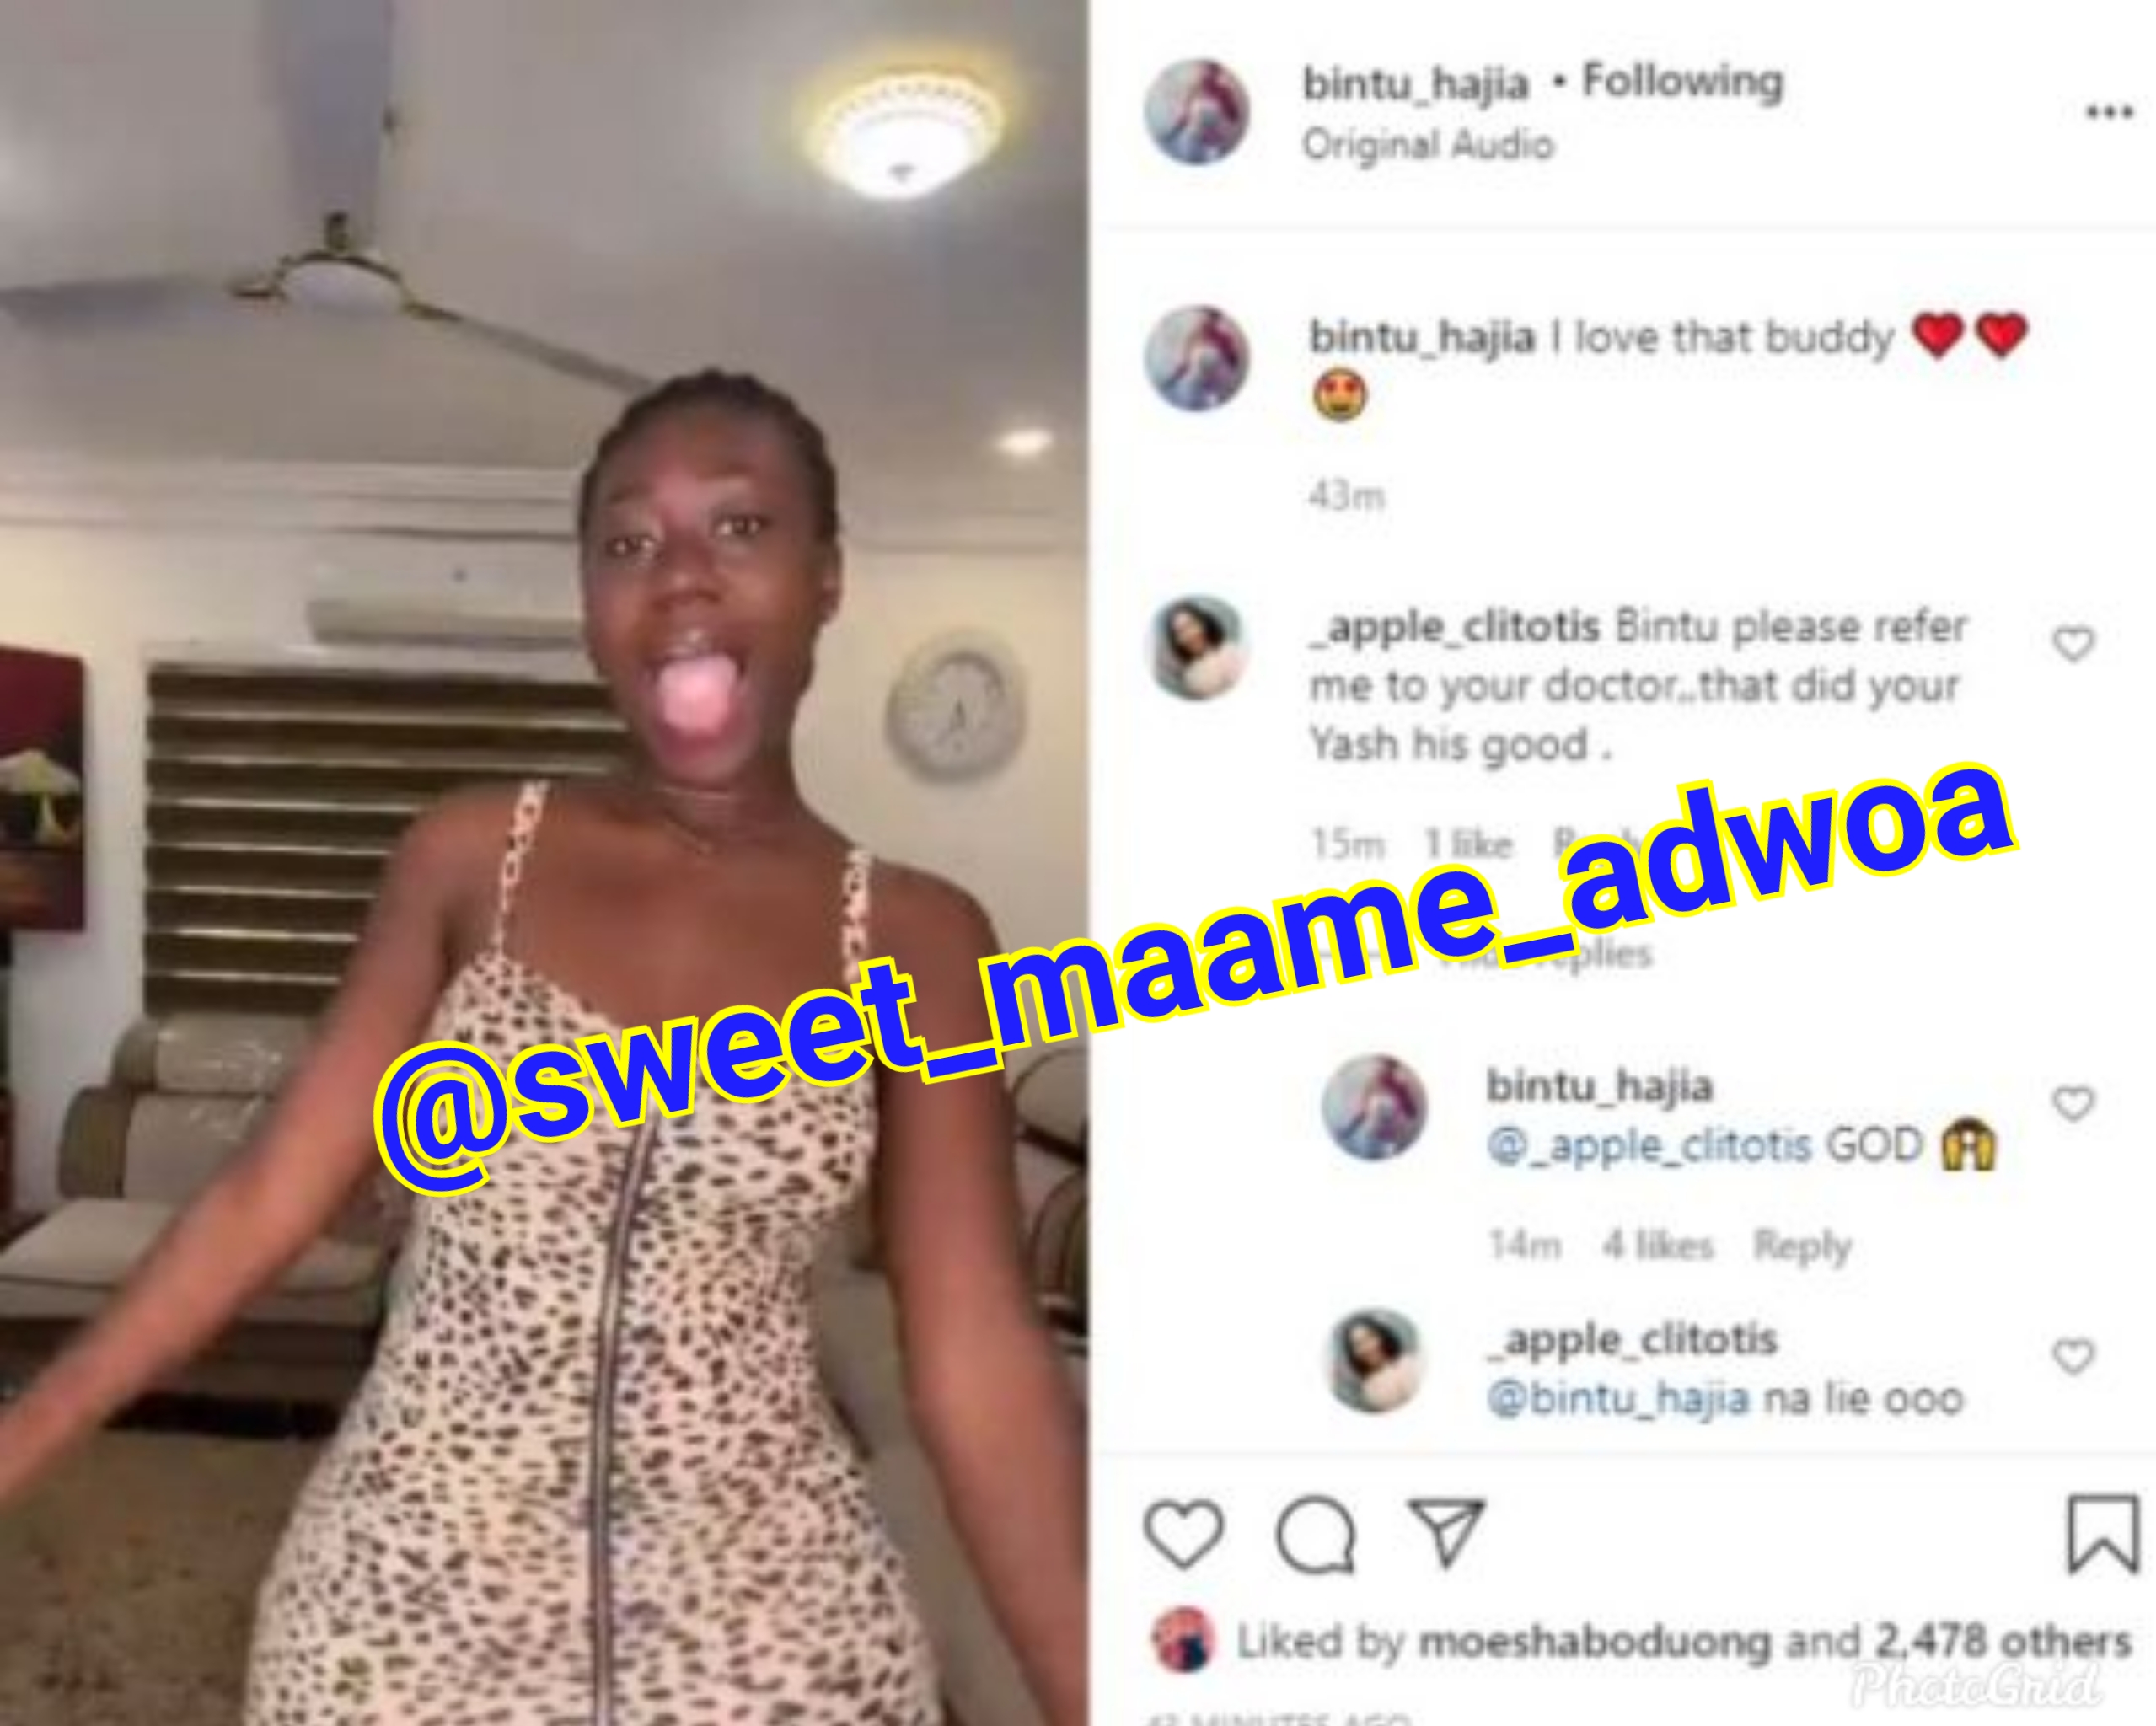 Hajia Bintu: Tik Tok star says her curves are natural from God